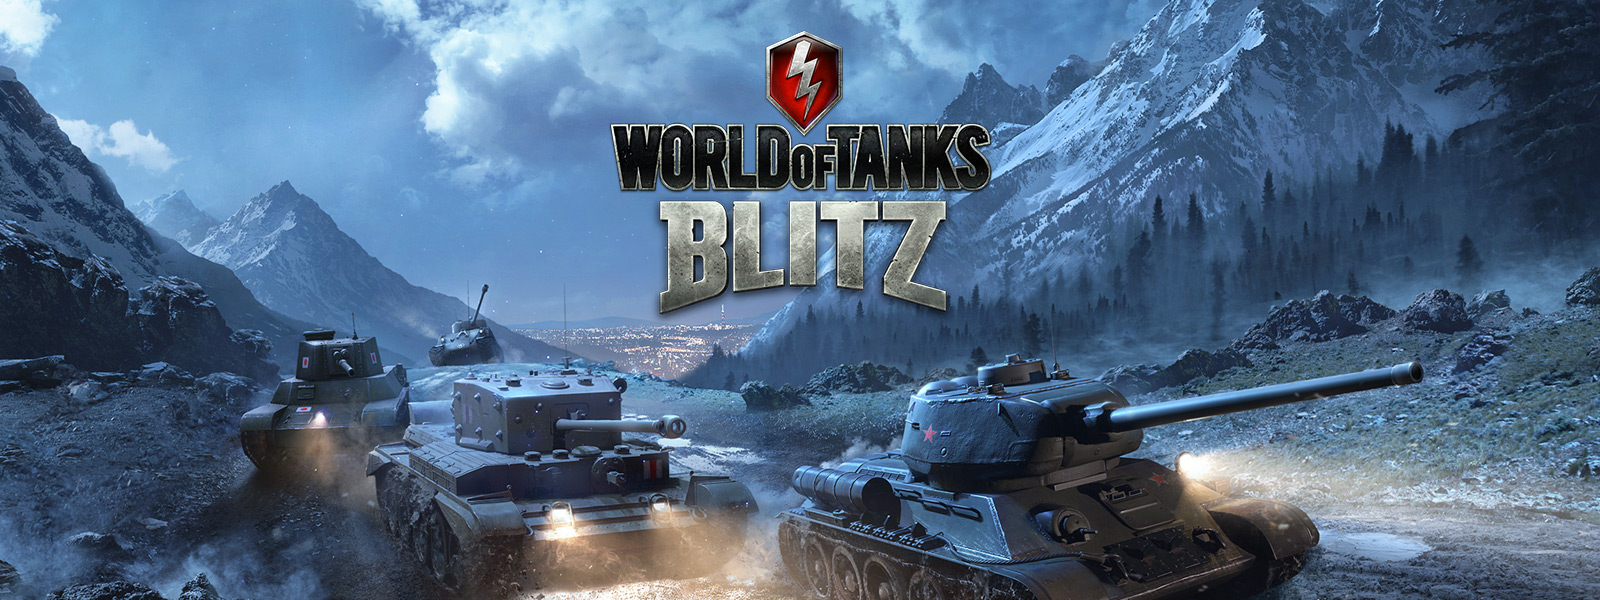 world of tanks download for blitz on xbox 360